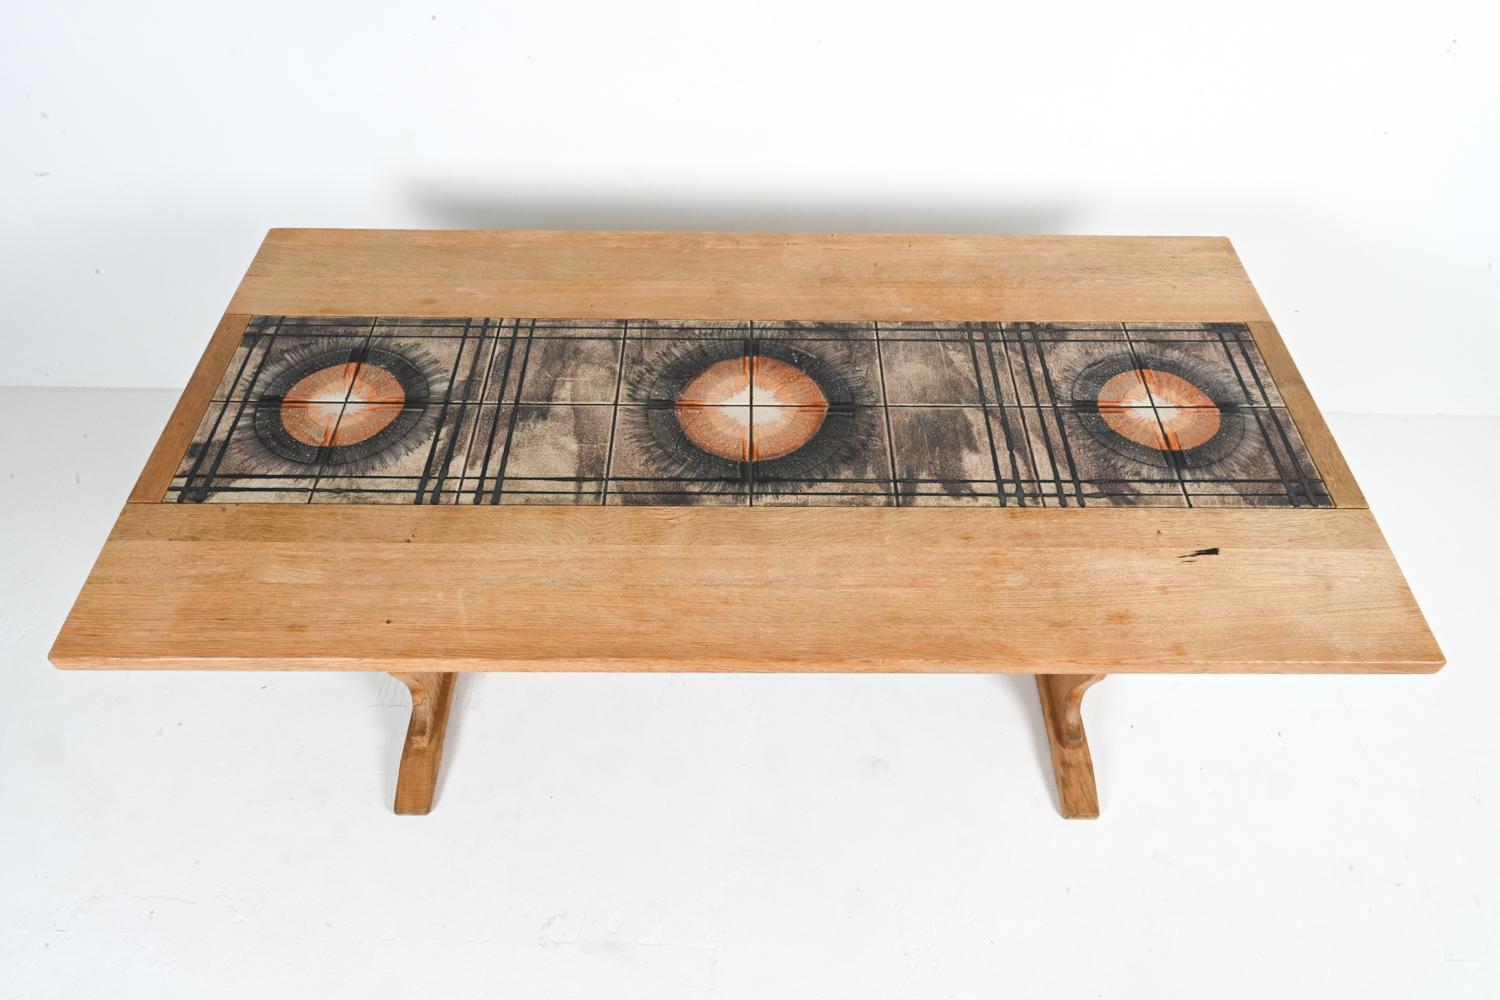 Danish Ox Art Oak & Ceramic Tile Mosaic-Top Dining Table With Leaves, c. 1970's 1